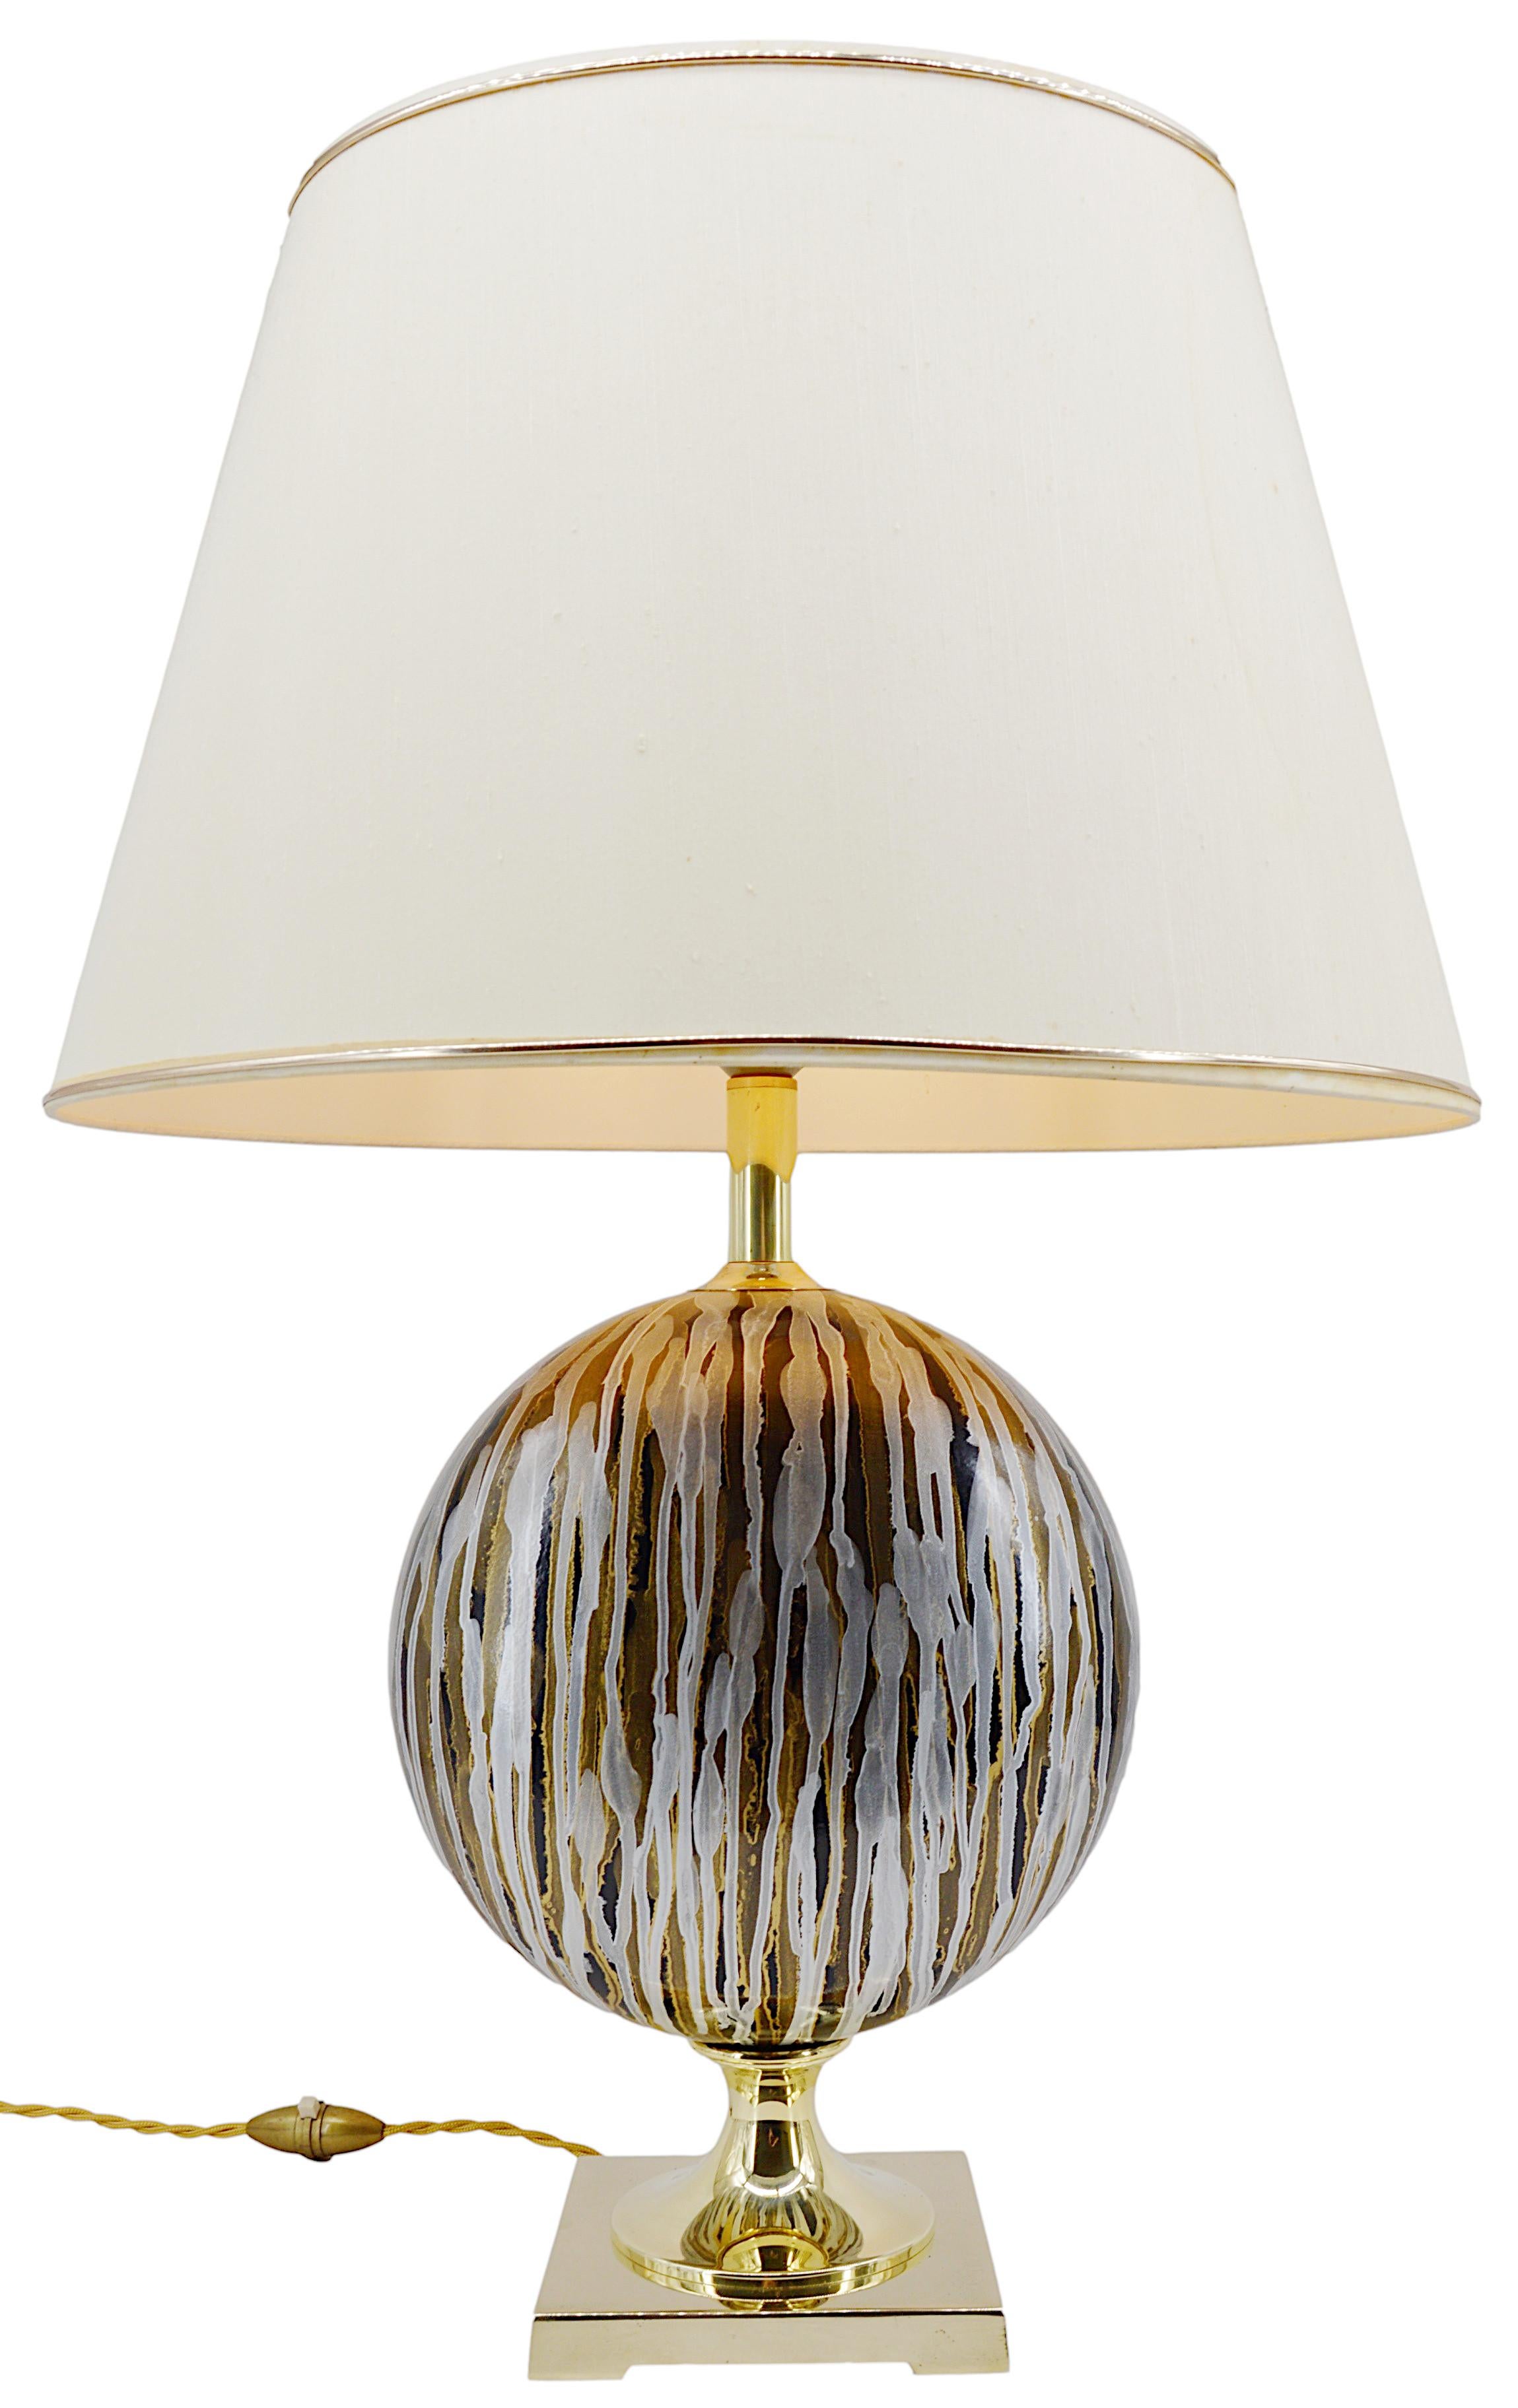 French table lamp by Maison Drimmer, France, 1980s. Ceramic and brass. The lampshade is not provided. So you can choose the one that suits your interior. Height from the base of the lamp to the top of the socket : 18.5